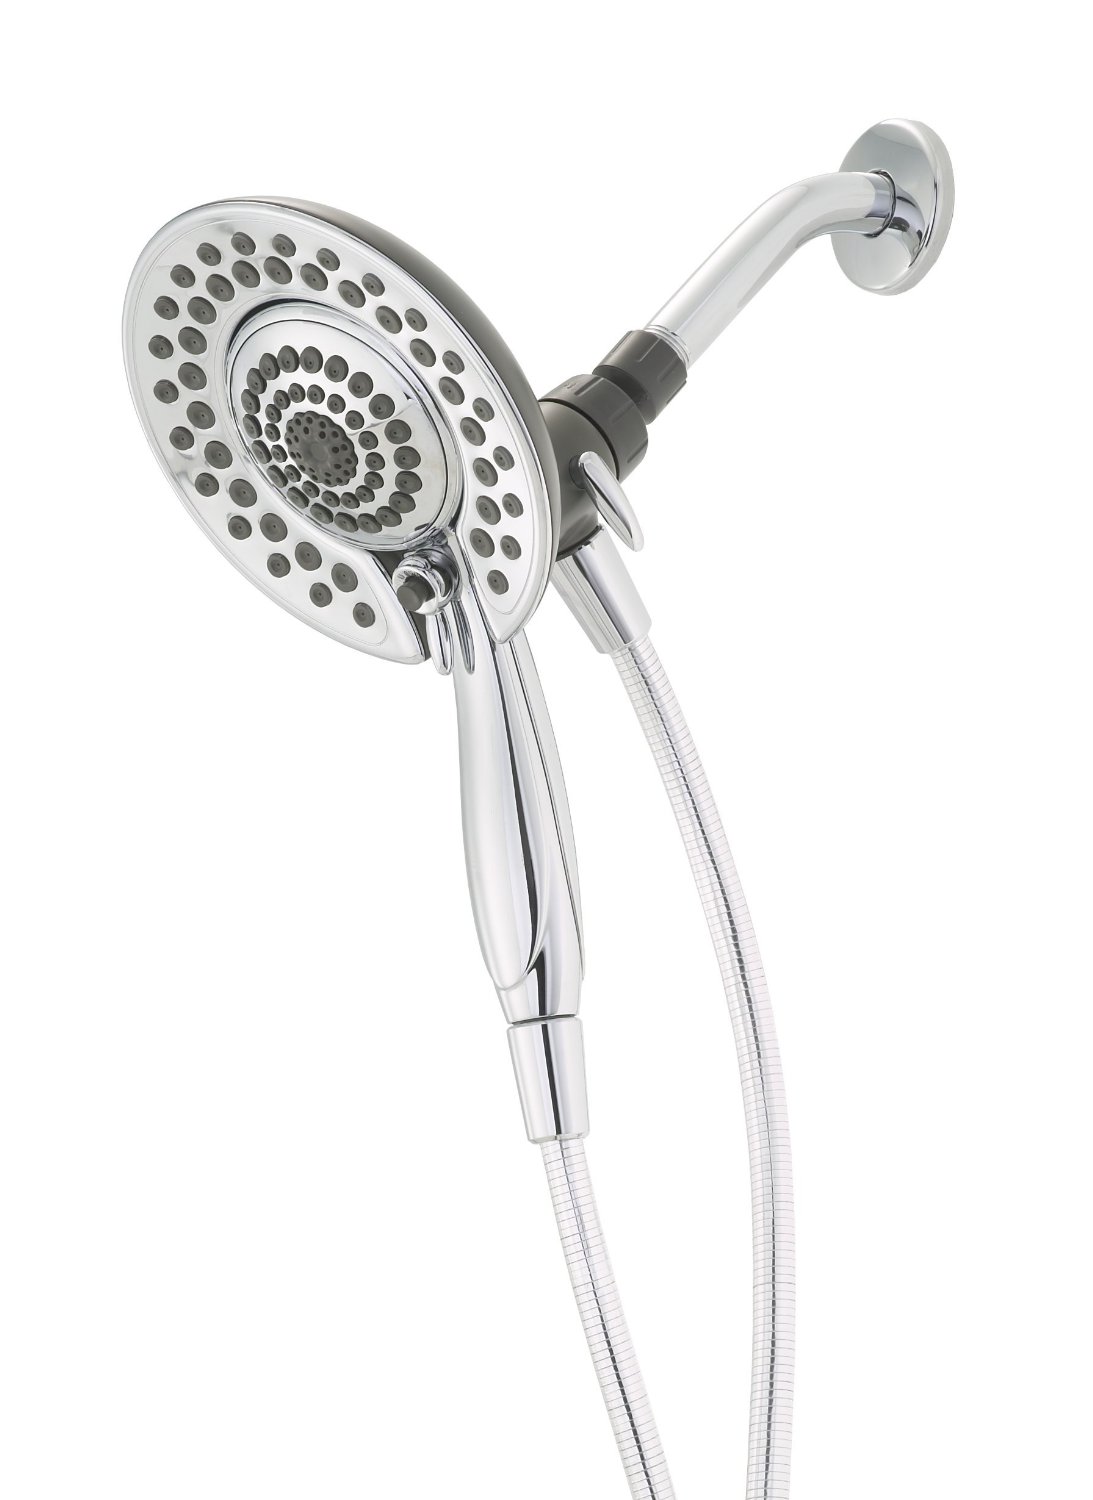 Delta 75584D Chrome IN2ITION 5 Spray Handheld Shower Head with Massage ...